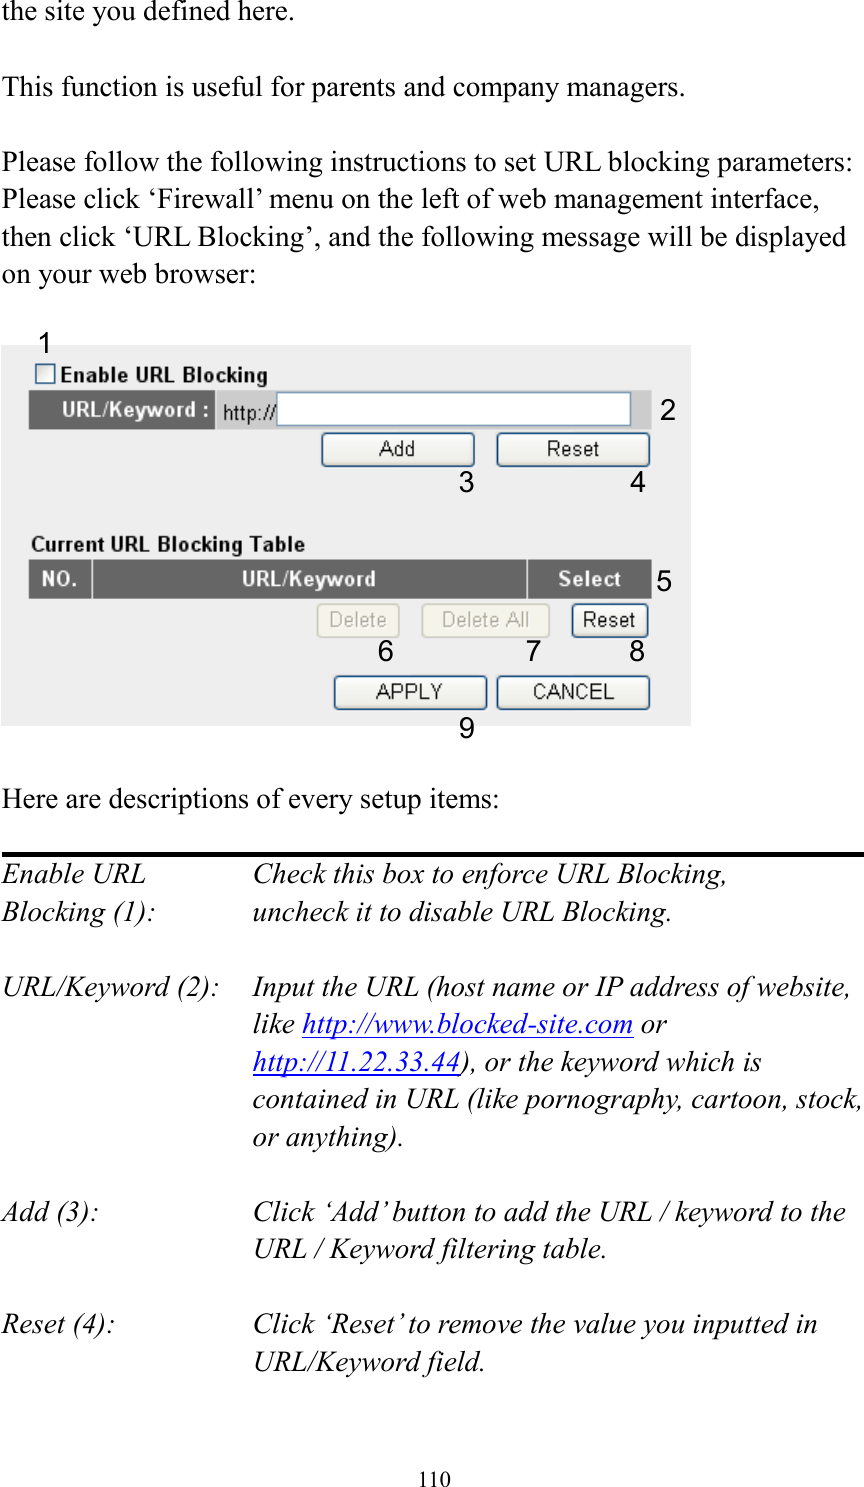 110 the site you defined here.  This function is useful for parents and company managers.  Please follow the following instructions to set URL blocking parameters: Please click ‘Firewall’ menu on the left of web management interface, then click ‘URL Blocking’, and the following message will be displayed on your web browser:    Here are descriptions of every setup items:  Enable URL      Check this box to enforce URL Blocking, Blocking (1):      uncheck it to disable URL Blocking.  URL/Keyword (2):    Input the URL (host name or IP address of website, like http://www.blocked-site.com or http://11.22.33.44), or the keyword which is contained in URL (like pornography, cartoon, stock, or anything).  Add (3):    Click ‘Add’ button to add the URL / keyword to the URL / Keyword filtering table.  Reset (4):    Click ‘Reset’ to remove the value you inputted in URL/Keyword field.  2 3 4 5 6 7 8 9 1 